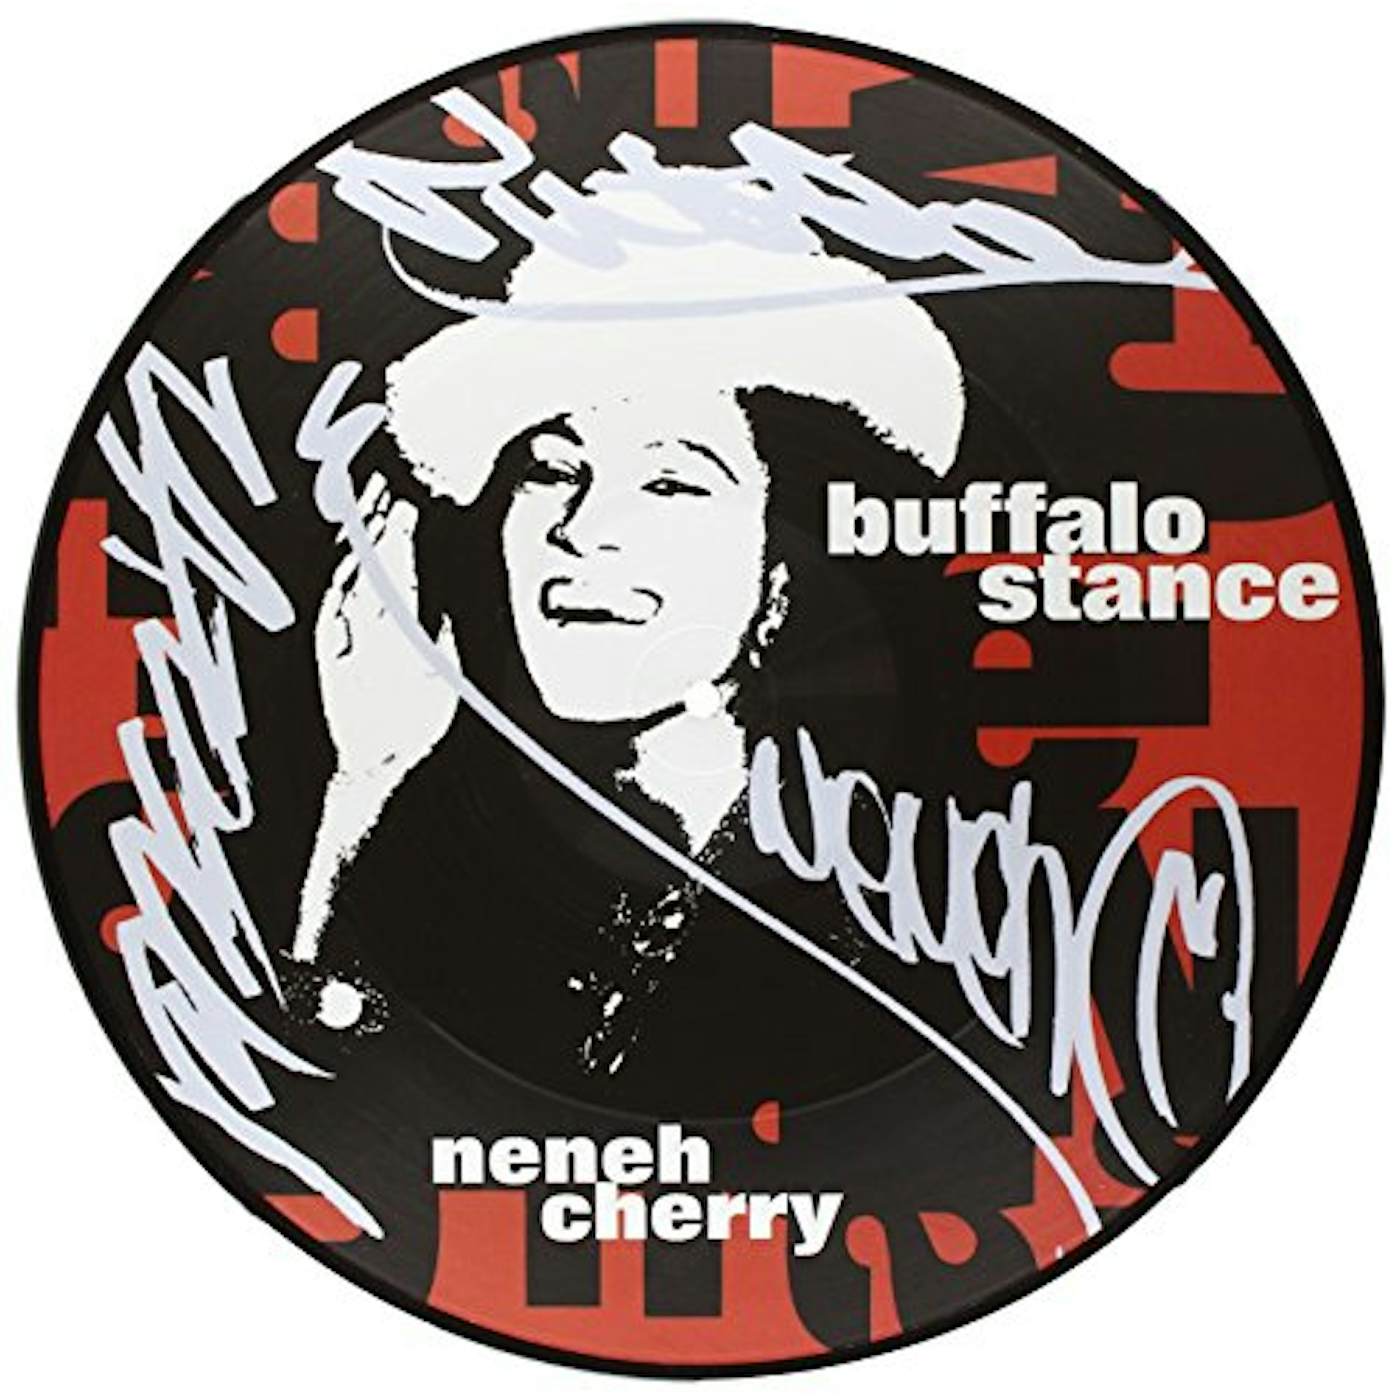 Neneh Cherry BUFALLO STANCE EXTENDED VERSION / KISSES ON THE Vinyl Record